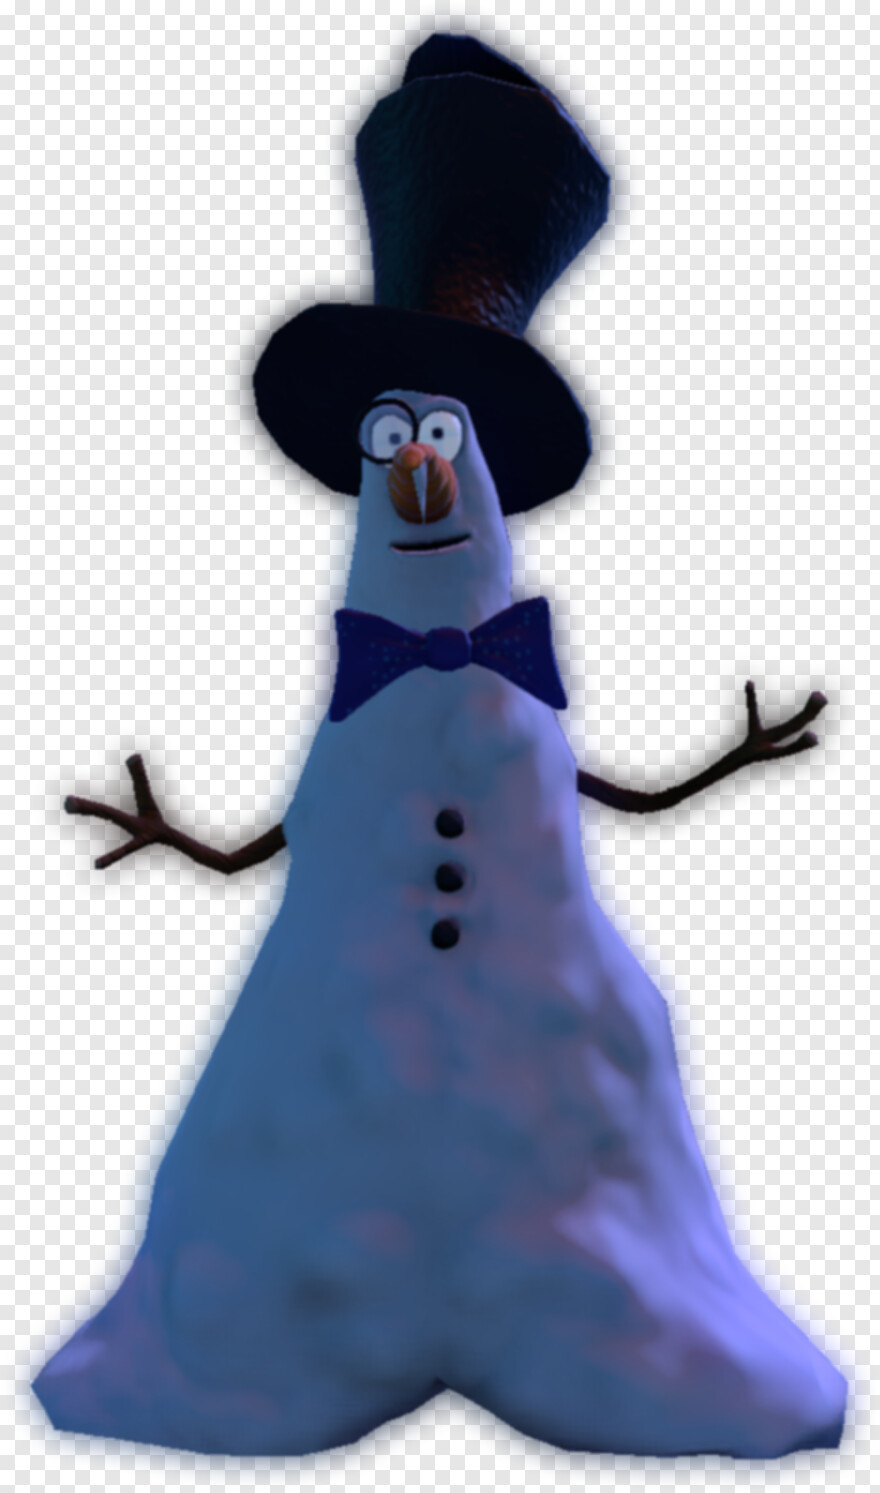 frosty-the-snowman # 1005432